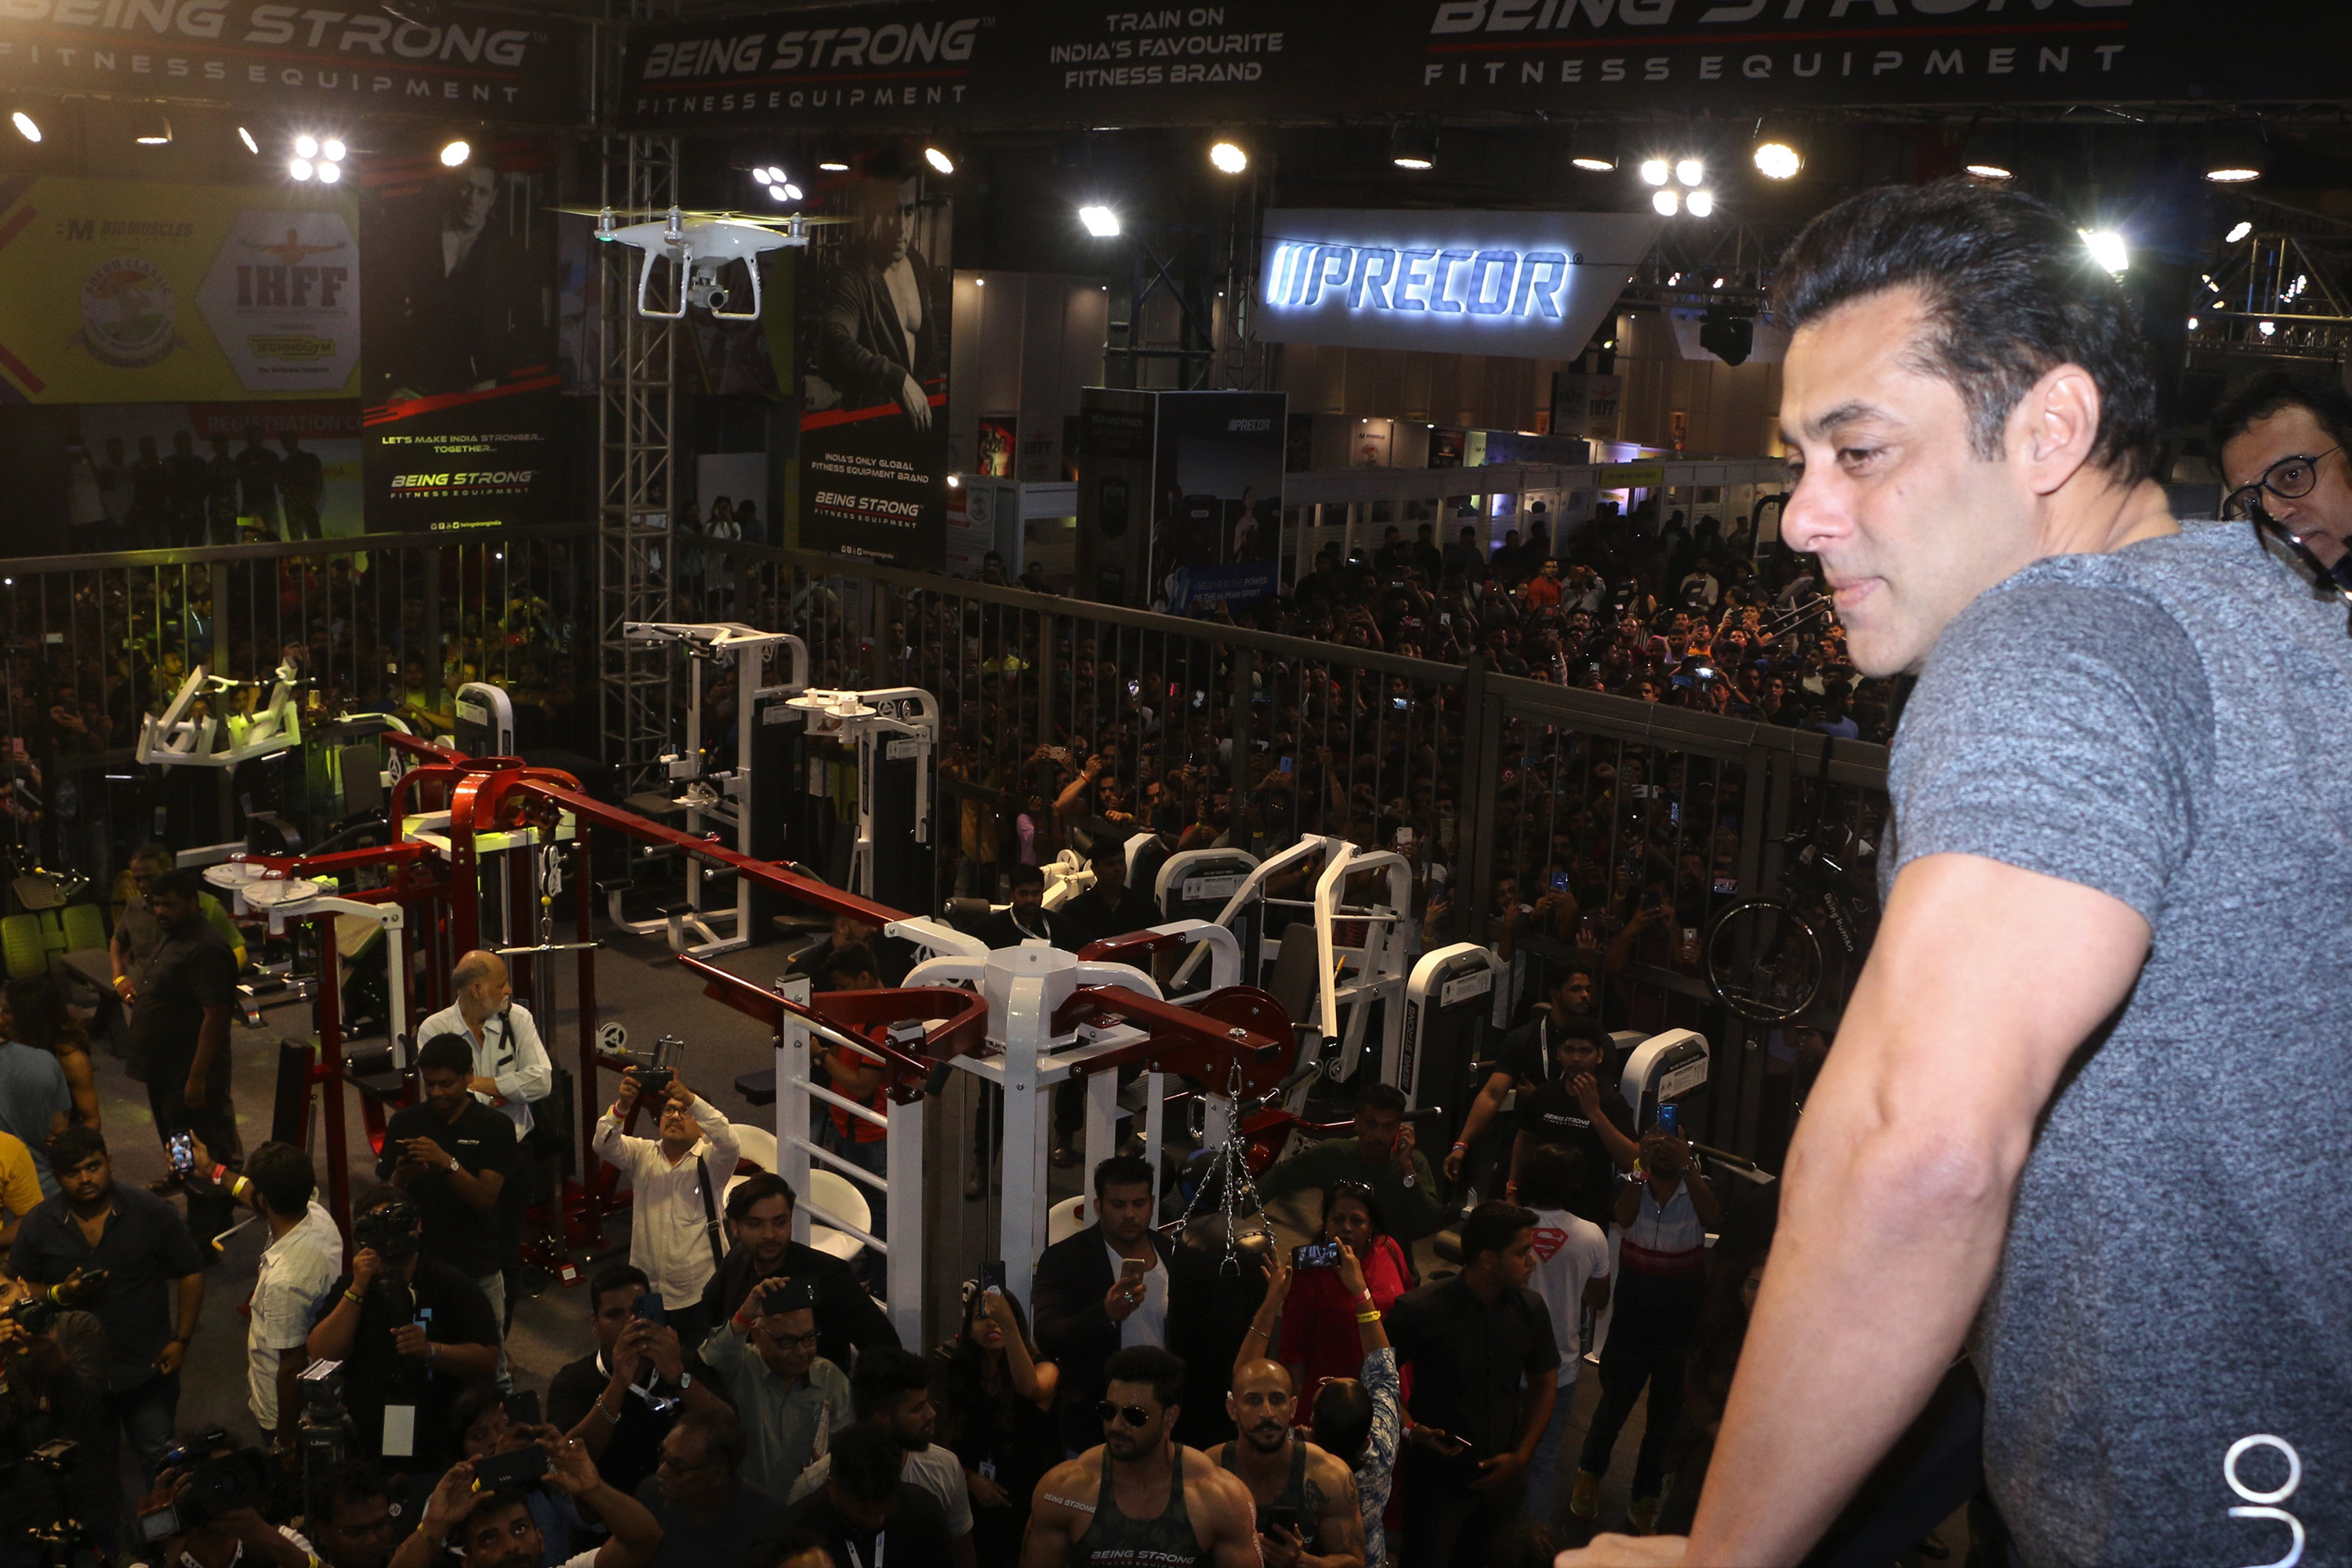 Being Strong’s Equipment to be showcased at Fitness Exhibition in Mumbai